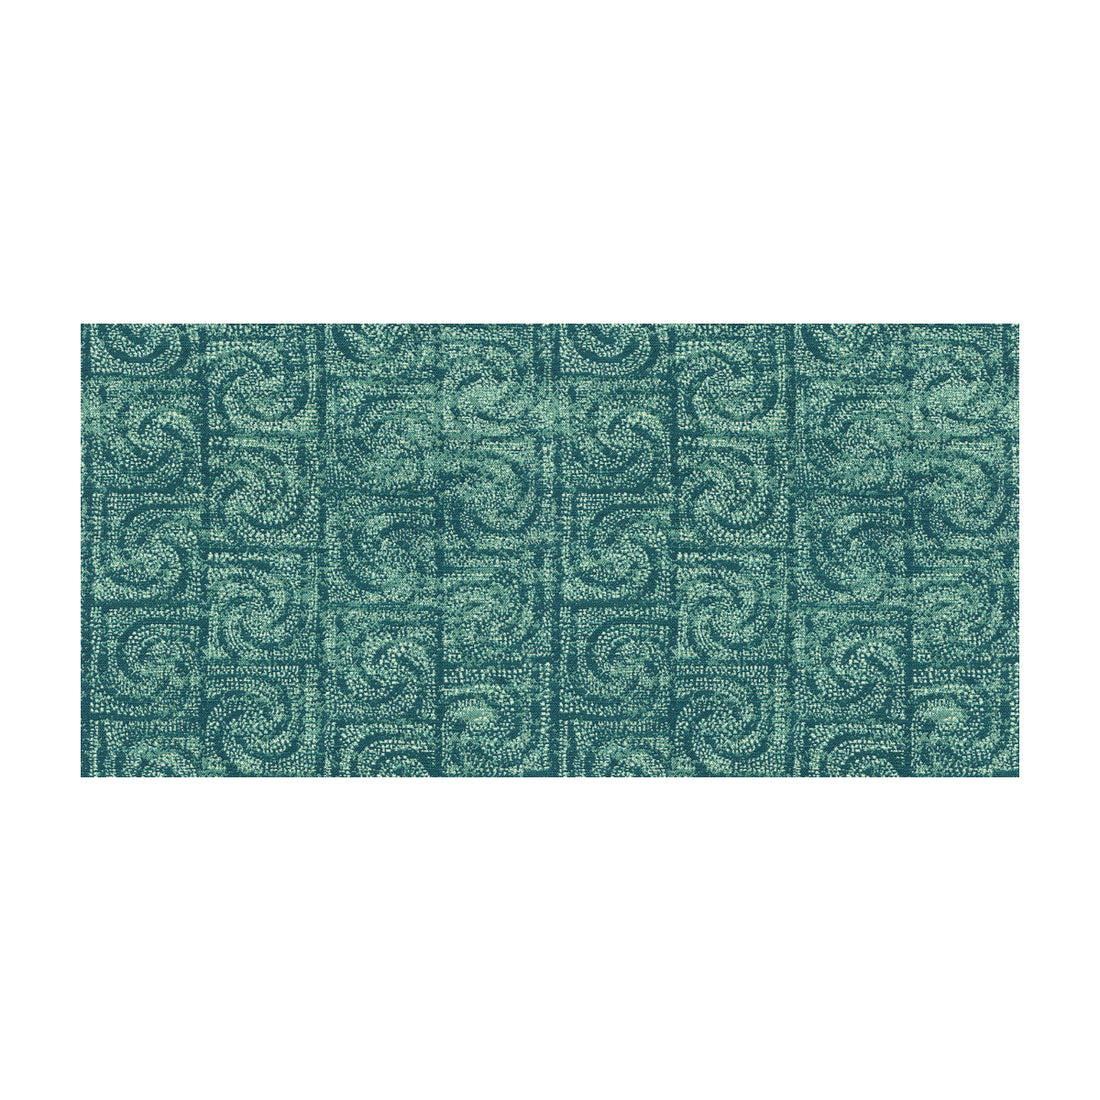 Hollister fabric in lagoon color - pattern 33411.35.0 - by Kravet Basics in the Jeffrey Alan Marks Waterside collection